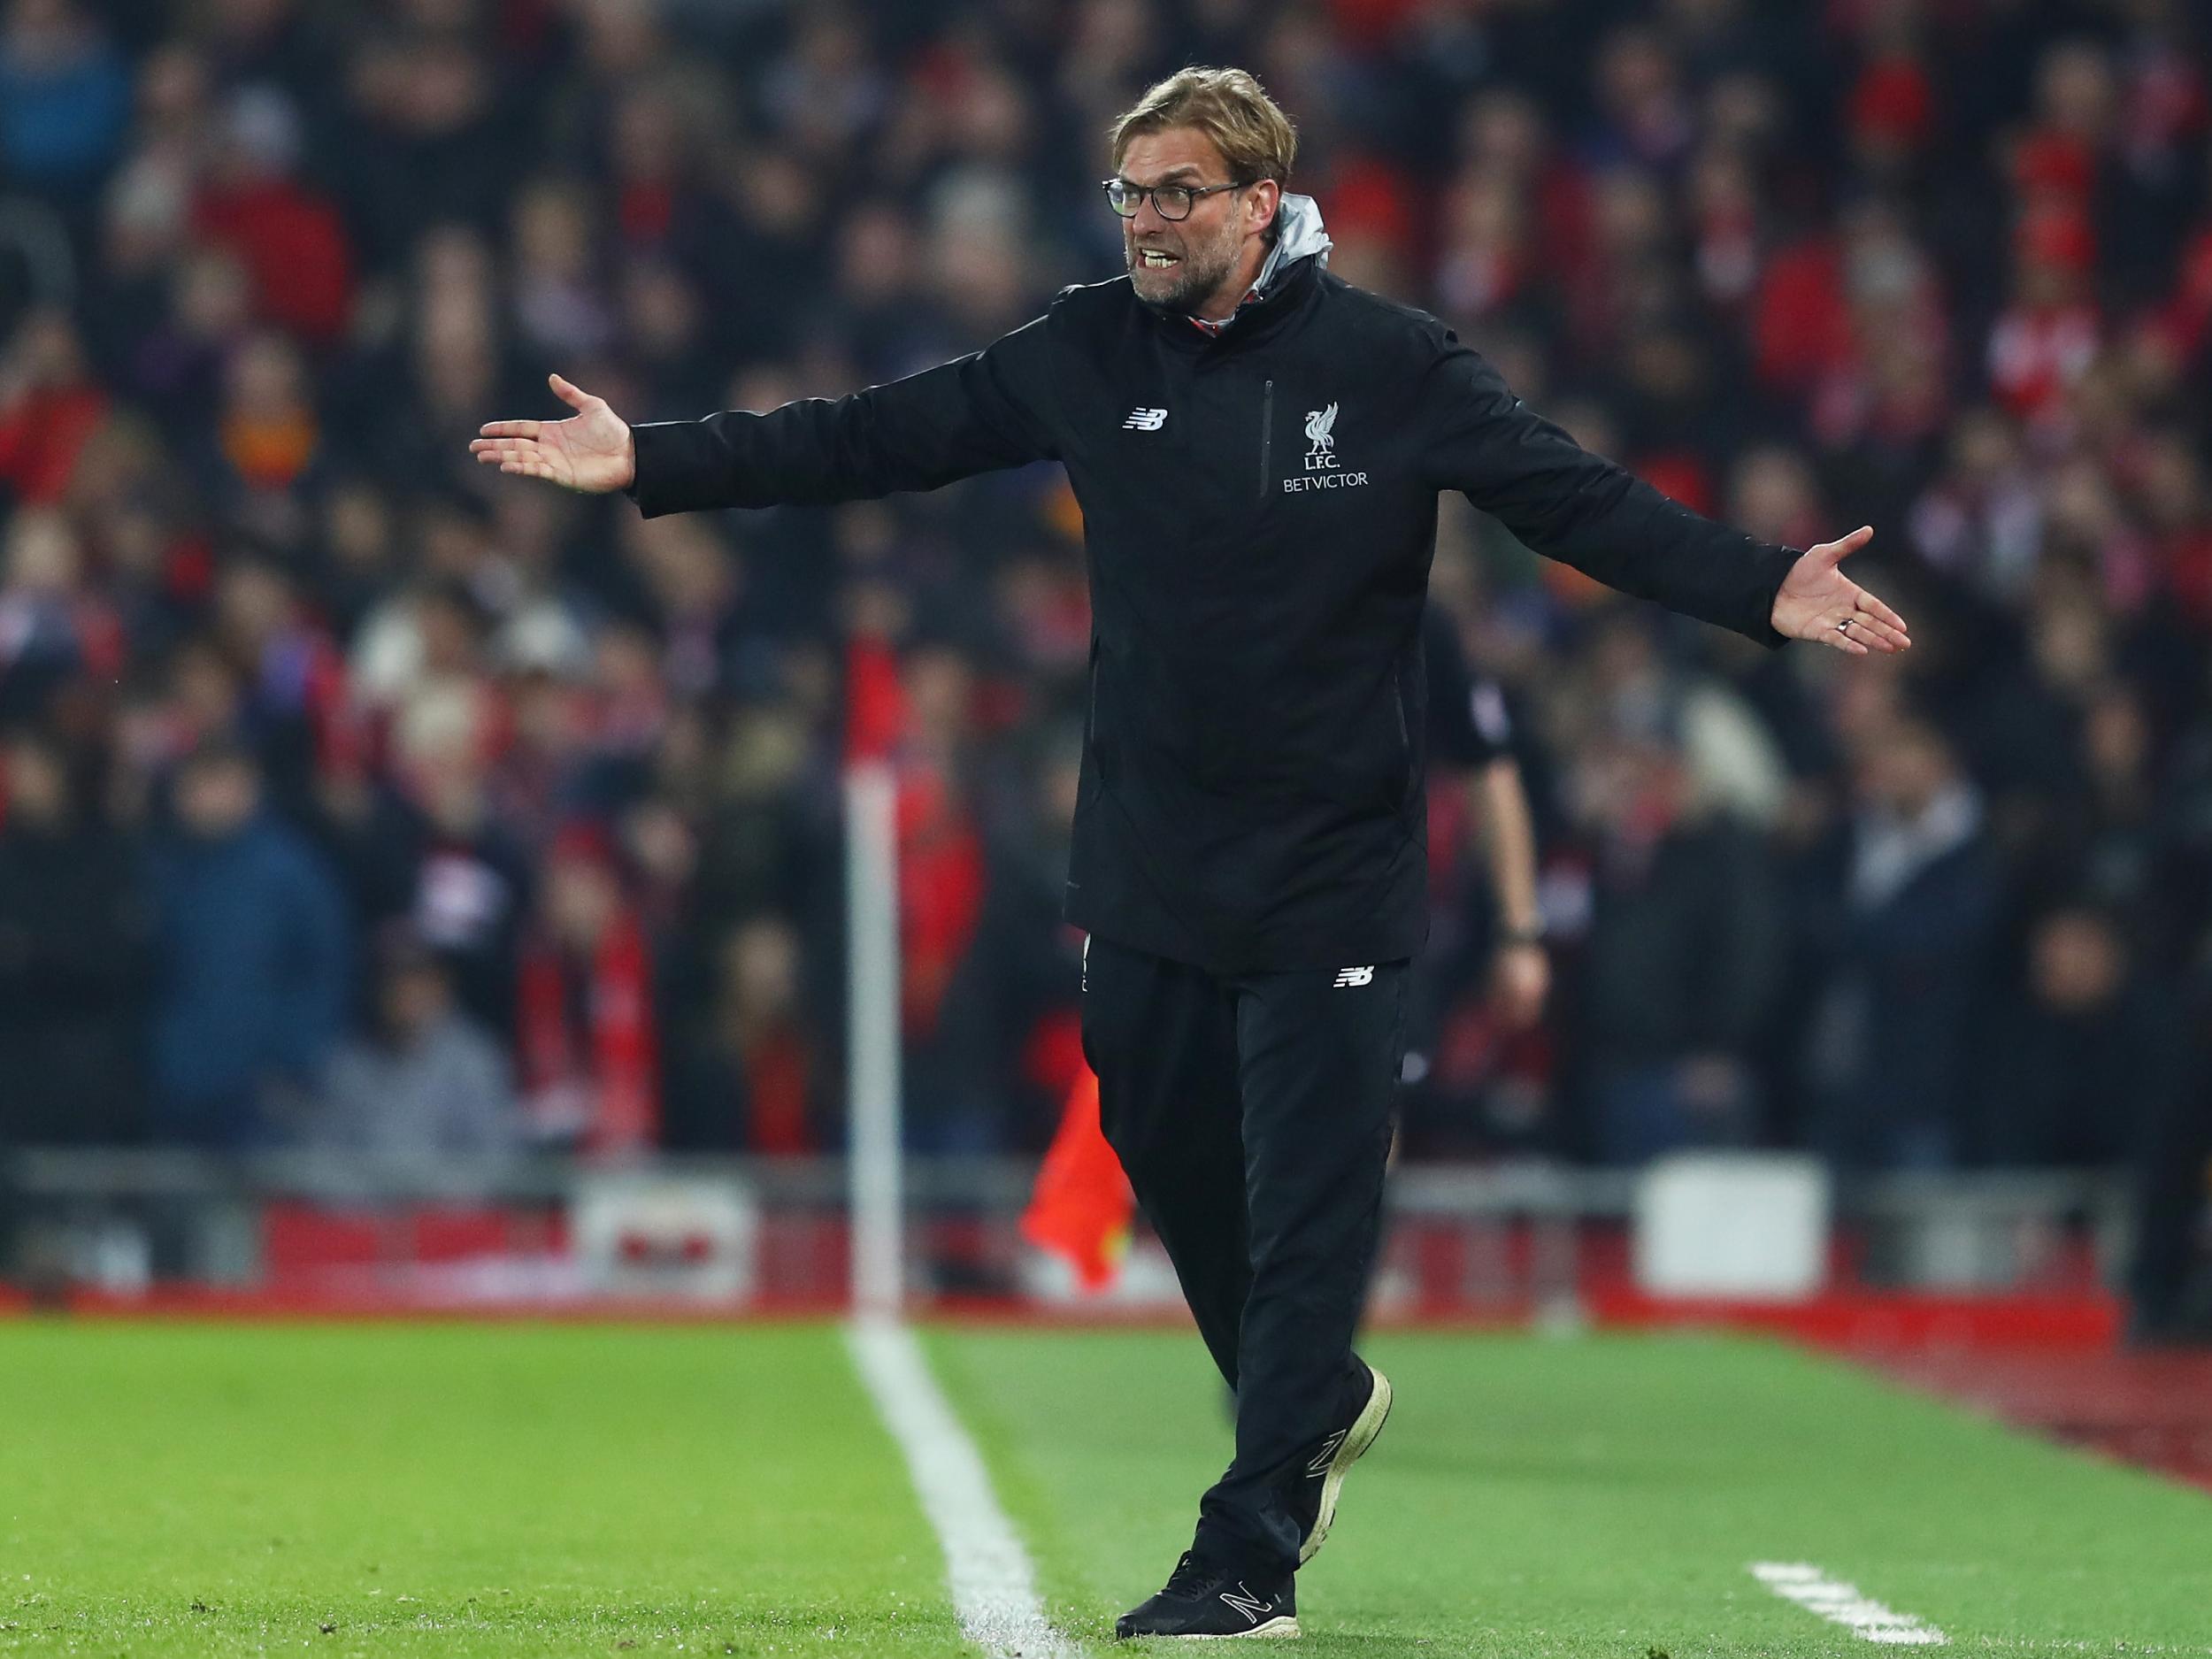 Klopp's touchline rages are becoming the talk of the Premier League